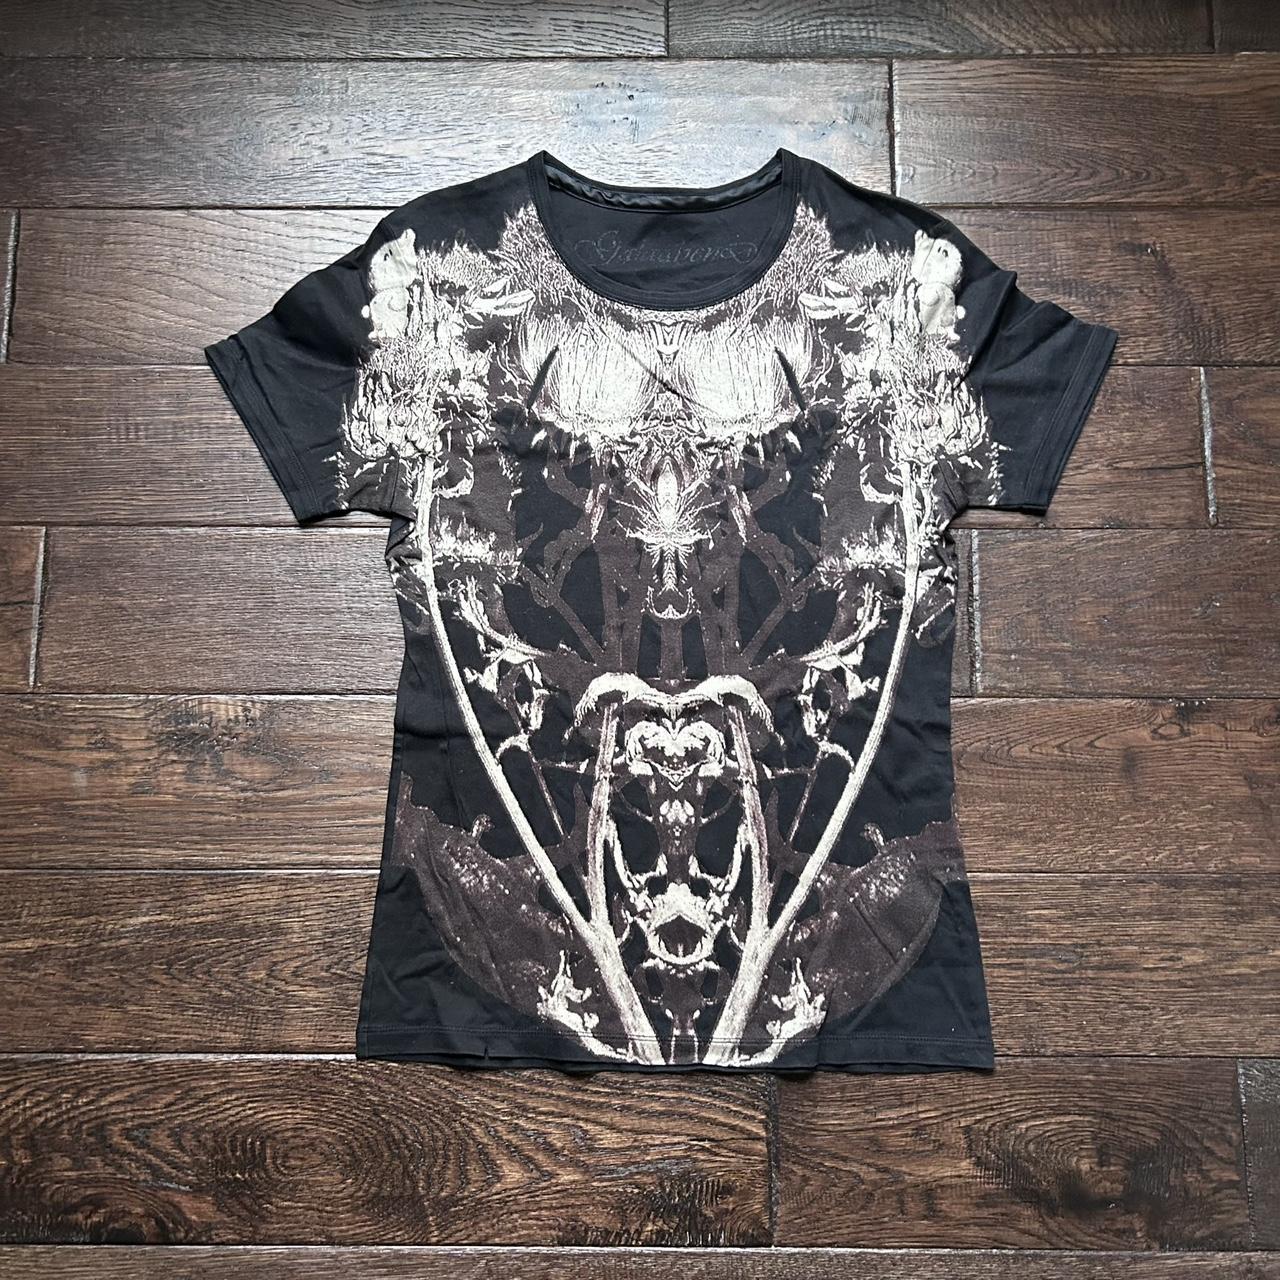 GalaabenD gothic shirt , has cool graphic on the...